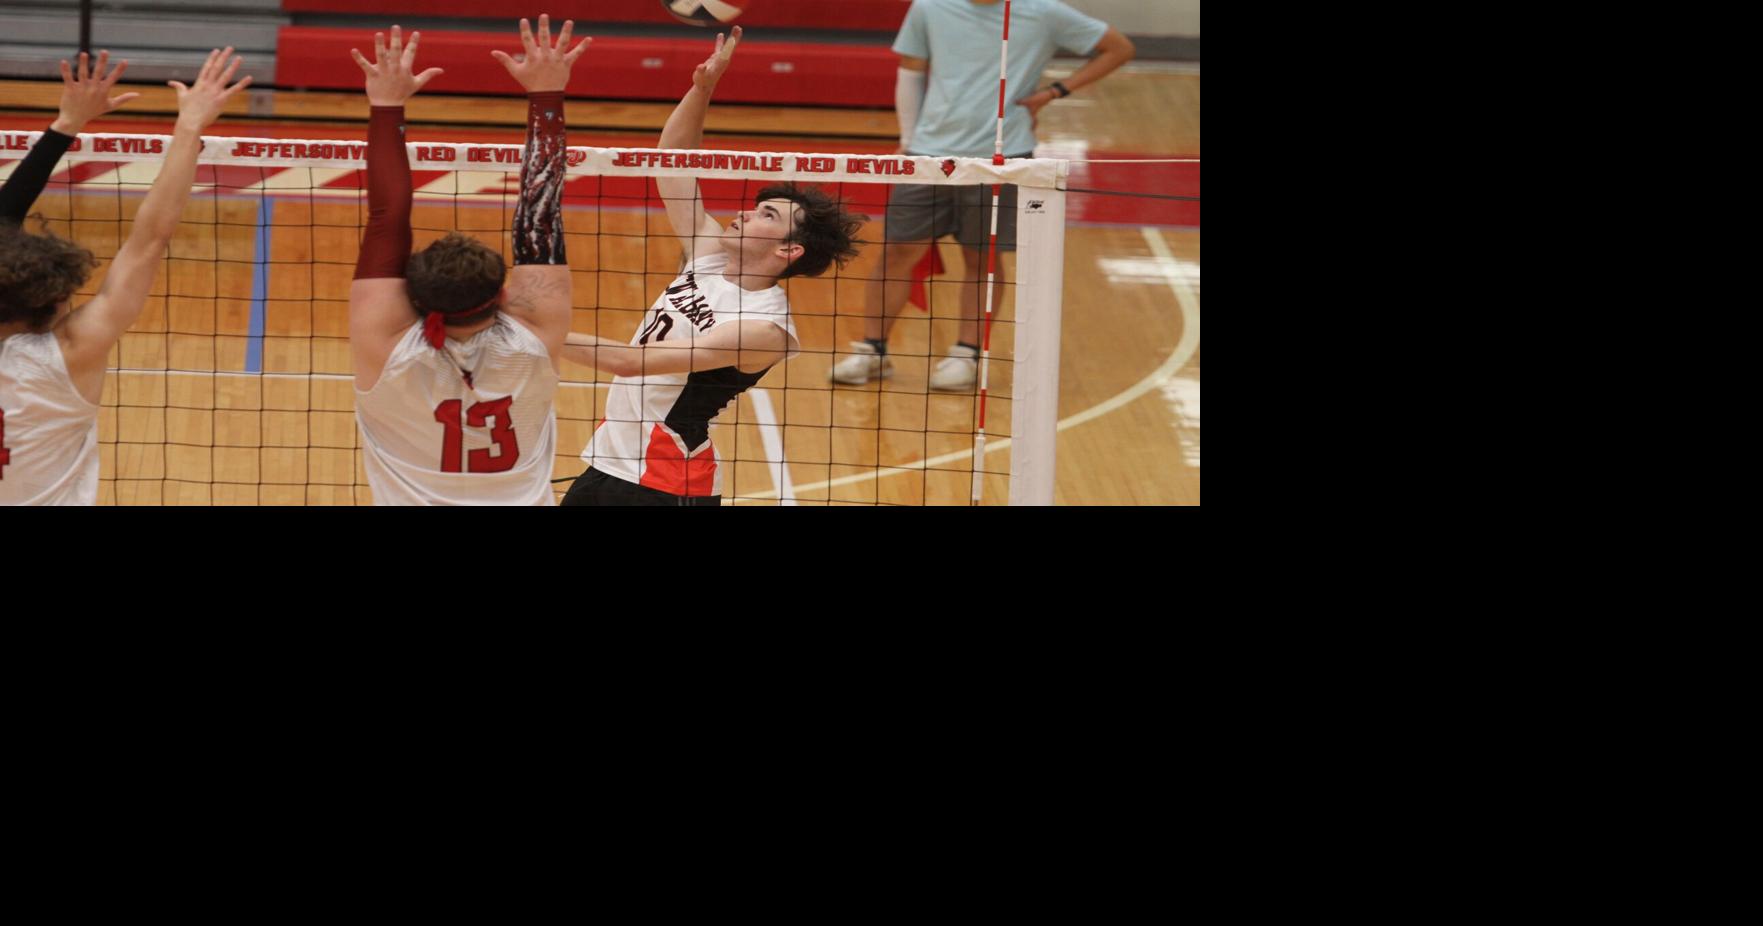 BOYS’ VOLLEYBALL ROUNDUP: Colts hand Bulldogs 1st loss